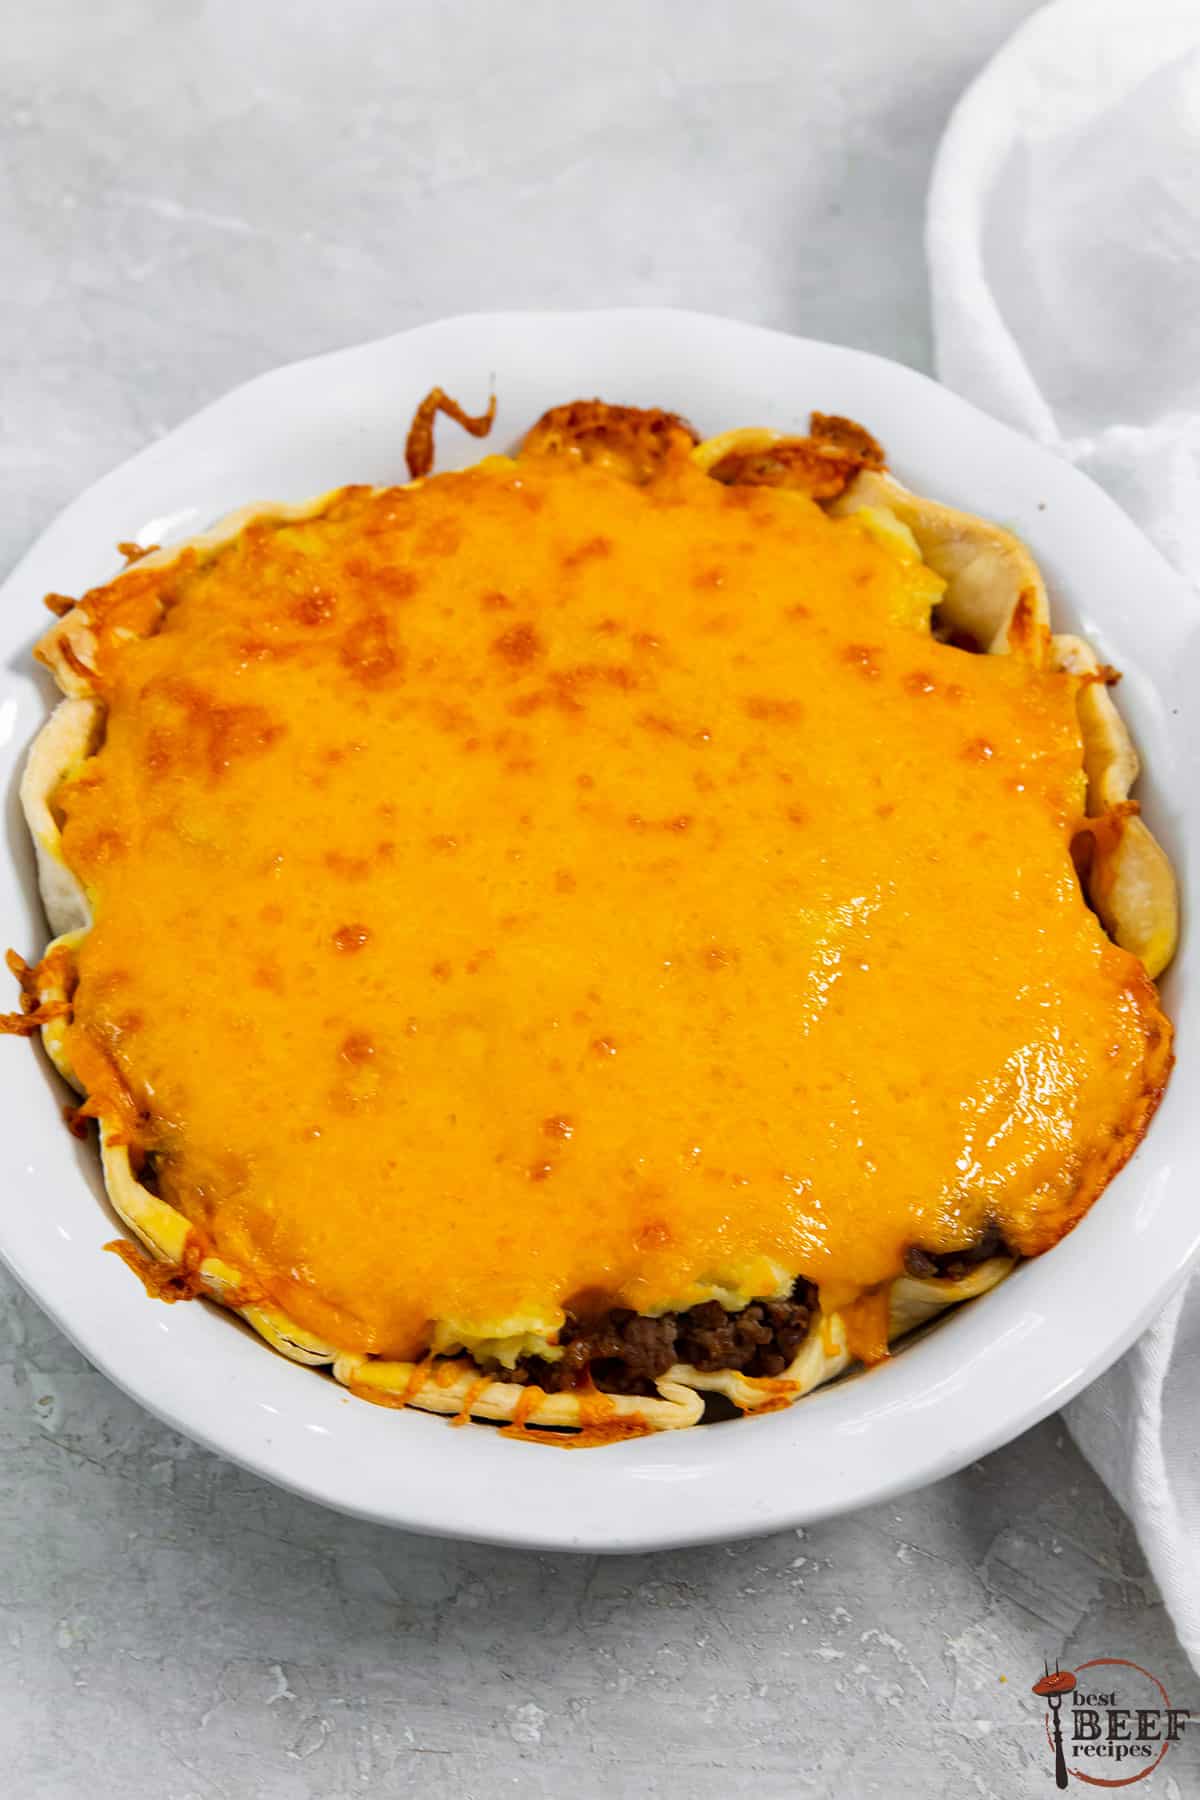 a fully baked cheeseburger pie in a white pie dish with melted cheese